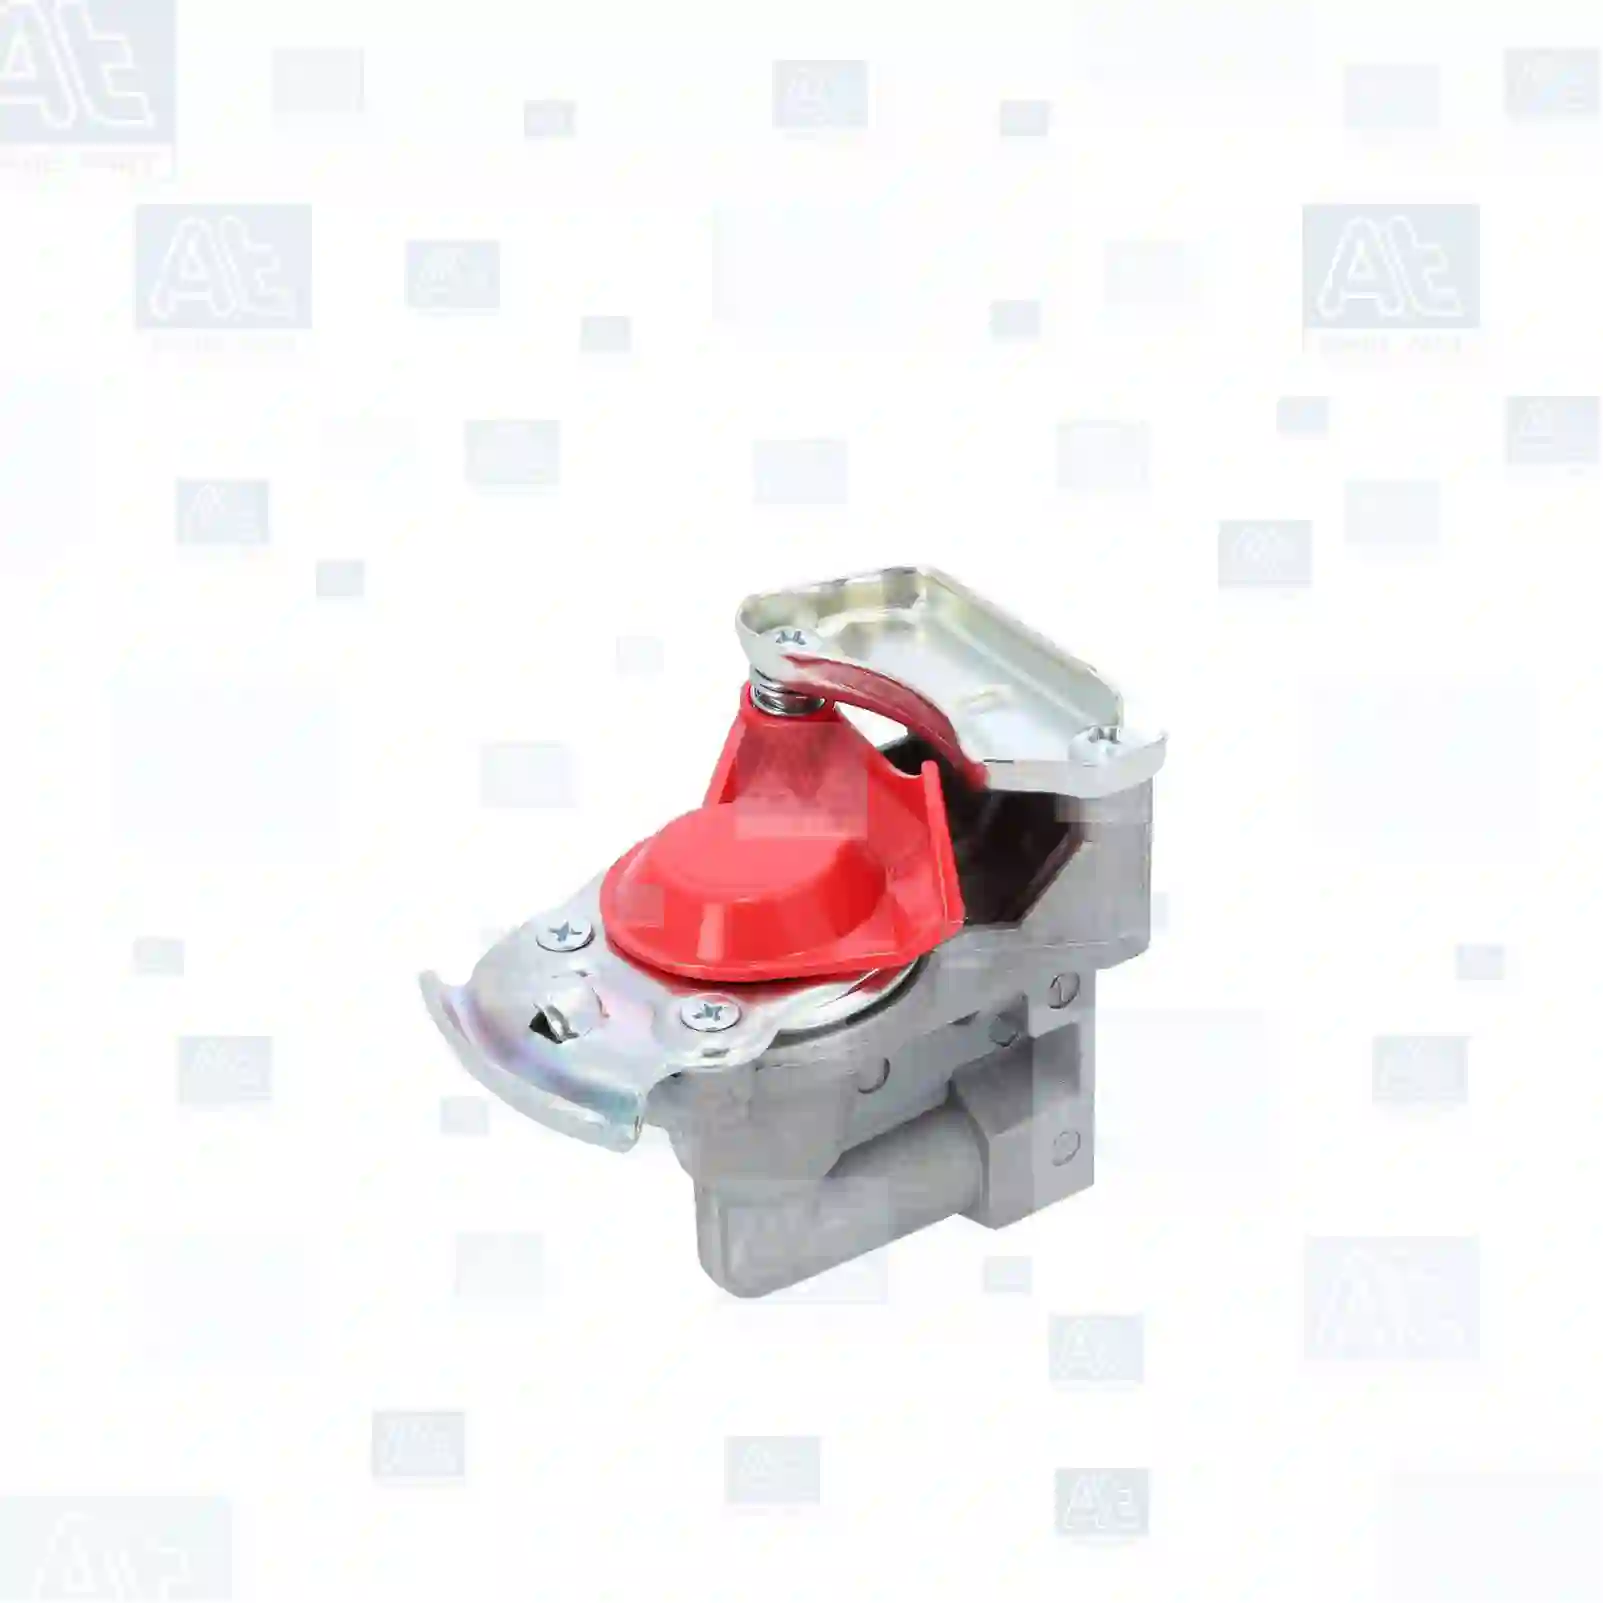 Palm coupling, red lid, 77724866, 0031062, 1505130, 31062, 02515298, 02515436, 02516898, 02521369, 04323303, 04715226, 04841035, 42070652, 42088851, 504186403, 71005207, 02516792, 02516808, 02516902, 02521371, 04463725, 04463735, 2516792, 2516808, 2516902, 2521371, 42159059, 79429, 502966508, 502966514, 81512206034, 81512206037, 81512206039, 81512206042, 81512206066, 81512206077, 0004293730, 0004294930, 0004295330, 0004296330, 0004297830, 5021170411, 5516017524, 1935532, 8283987000, 600607344 ||  77724866 At Spare Part | Engine, Accelerator Pedal, Camshaft, Connecting Rod, Crankcase, Crankshaft, Cylinder Head, Engine Suspension Mountings, Exhaust Manifold, Exhaust Gas Recirculation, Filter Kits, Flywheel Housing, General Overhaul Kits, Engine, Intake Manifold, Oil Cleaner, Oil Cooler, Oil Filter, Oil Pump, Oil Sump, Piston & Liner, Sensor & Switch, Timing Case, Turbocharger, Cooling System, Belt Tensioner, Coolant Filter, Coolant Pipe, Corrosion Prevention Agent, Drive, Expansion Tank, Fan, Intercooler, Monitors & Gauges, Radiator, Thermostat, V-Belt / Timing belt, Water Pump, Fuel System, Electronical Injector Unit, Feed Pump, Fuel Filter, cpl., Fuel Gauge Sender,  Fuel Line, Fuel Pump, Fuel Tank, Injection Line Kit, Injection Pump, Exhaust System, Clutch & Pedal, Gearbox, Propeller Shaft, Axles, Brake System, Hubs & Wheels, Suspension, Leaf Spring, Universal Parts / Accessories, Steering, Electrical System, Cabin Palm coupling, red lid, 77724866, 0031062, 1505130, 31062, 02515298, 02515436, 02516898, 02521369, 04323303, 04715226, 04841035, 42070652, 42088851, 504186403, 71005207, 02516792, 02516808, 02516902, 02521371, 04463725, 04463735, 2516792, 2516808, 2516902, 2521371, 42159059, 79429, 502966508, 502966514, 81512206034, 81512206037, 81512206039, 81512206042, 81512206066, 81512206077, 0004293730, 0004294930, 0004295330, 0004296330, 0004297830, 5021170411, 5516017524, 1935532, 8283987000, 600607344 ||  77724866 At Spare Part | Engine, Accelerator Pedal, Camshaft, Connecting Rod, Crankcase, Crankshaft, Cylinder Head, Engine Suspension Mountings, Exhaust Manifold, Exhaust Gas Recirculation, Filter Kits, Flywheel Housing, General Overhaul Kits, Engine, Intake Manifold, Oil Cleaner, Oil Cooler, Oil Filter, Oil Pump, Oil Sump, Piston & Liner, Sensor & Switch, Timing Case, Turbocharger, Cooling System, Belt Tensioner, Coolant Filter, Coolant Pipe, Corrosion Prevention Agent, Drive, Expansion Tank, Fan, Intercooler, Monitors & Gauges, Radiator, Thermostat, V-Belt / Timing belt, Water Pump, Fuel System, Electronical Injector Unit, Feed Pump, Fuel Filter, cpl., Fuel Gauge Sender,  Fuel Line, Fuel Pump, Fuel Tank, Injection Line Kit, Injection Pump, Exhaust System, Clutch & Pedal, Gearbox, Propeller Shaft, Axles, Brake System, Hubs & Wheels, Suspension, Leaf Spring, Universal Parts / Accessories, Steering, Electrical System, Cabin